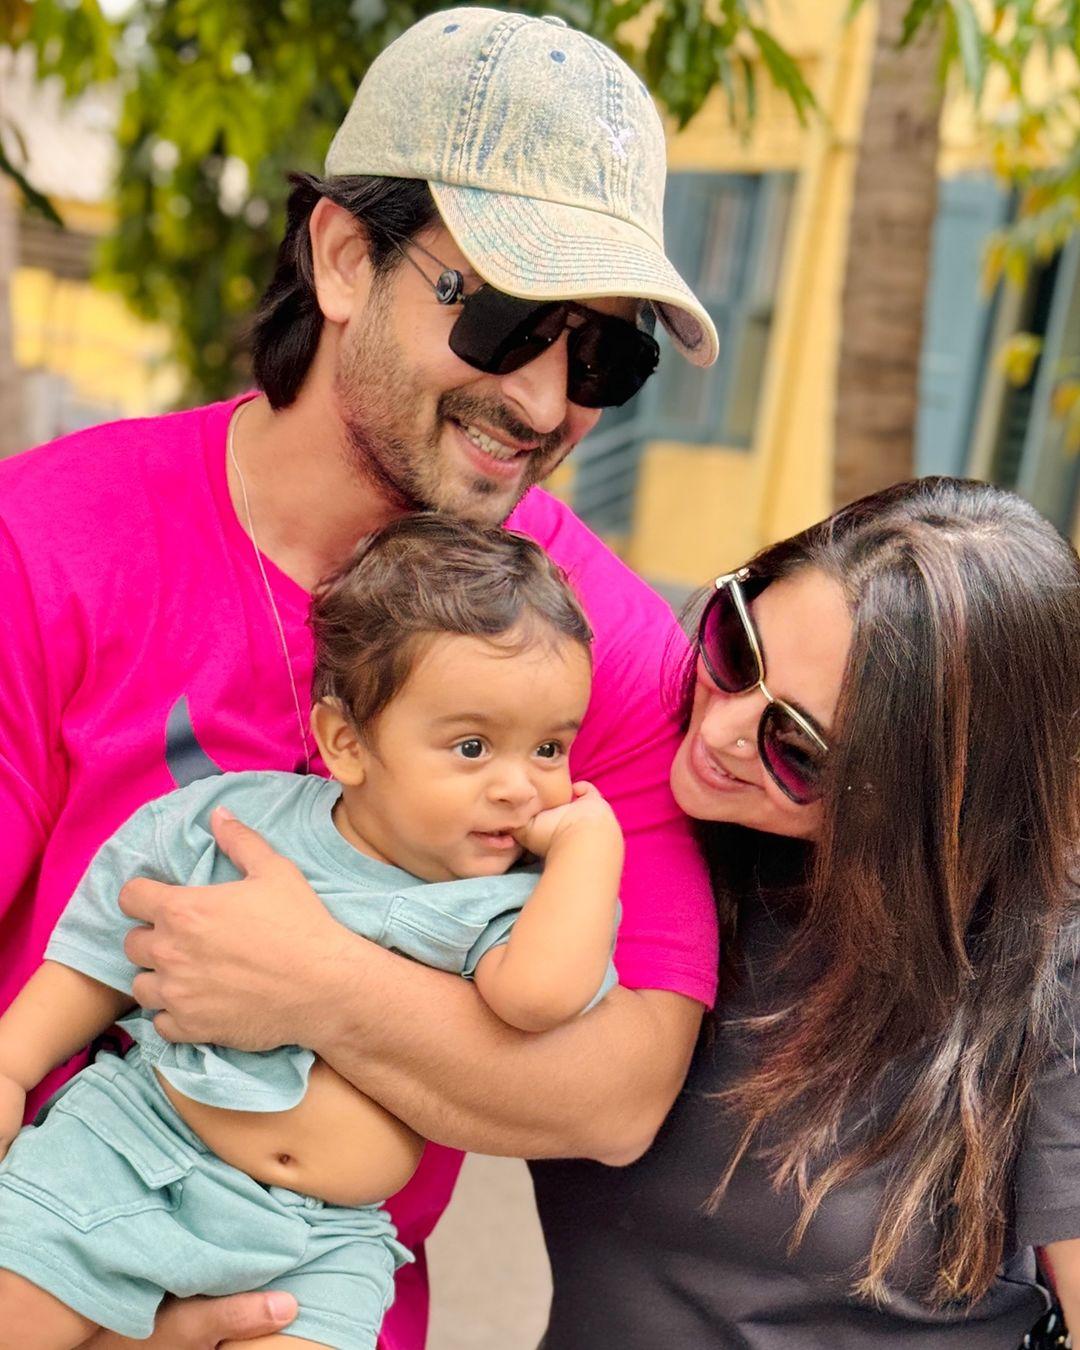 Shoaib has been posting cute pictures with his little bundle of joy, and we can't get enough of their cuteness